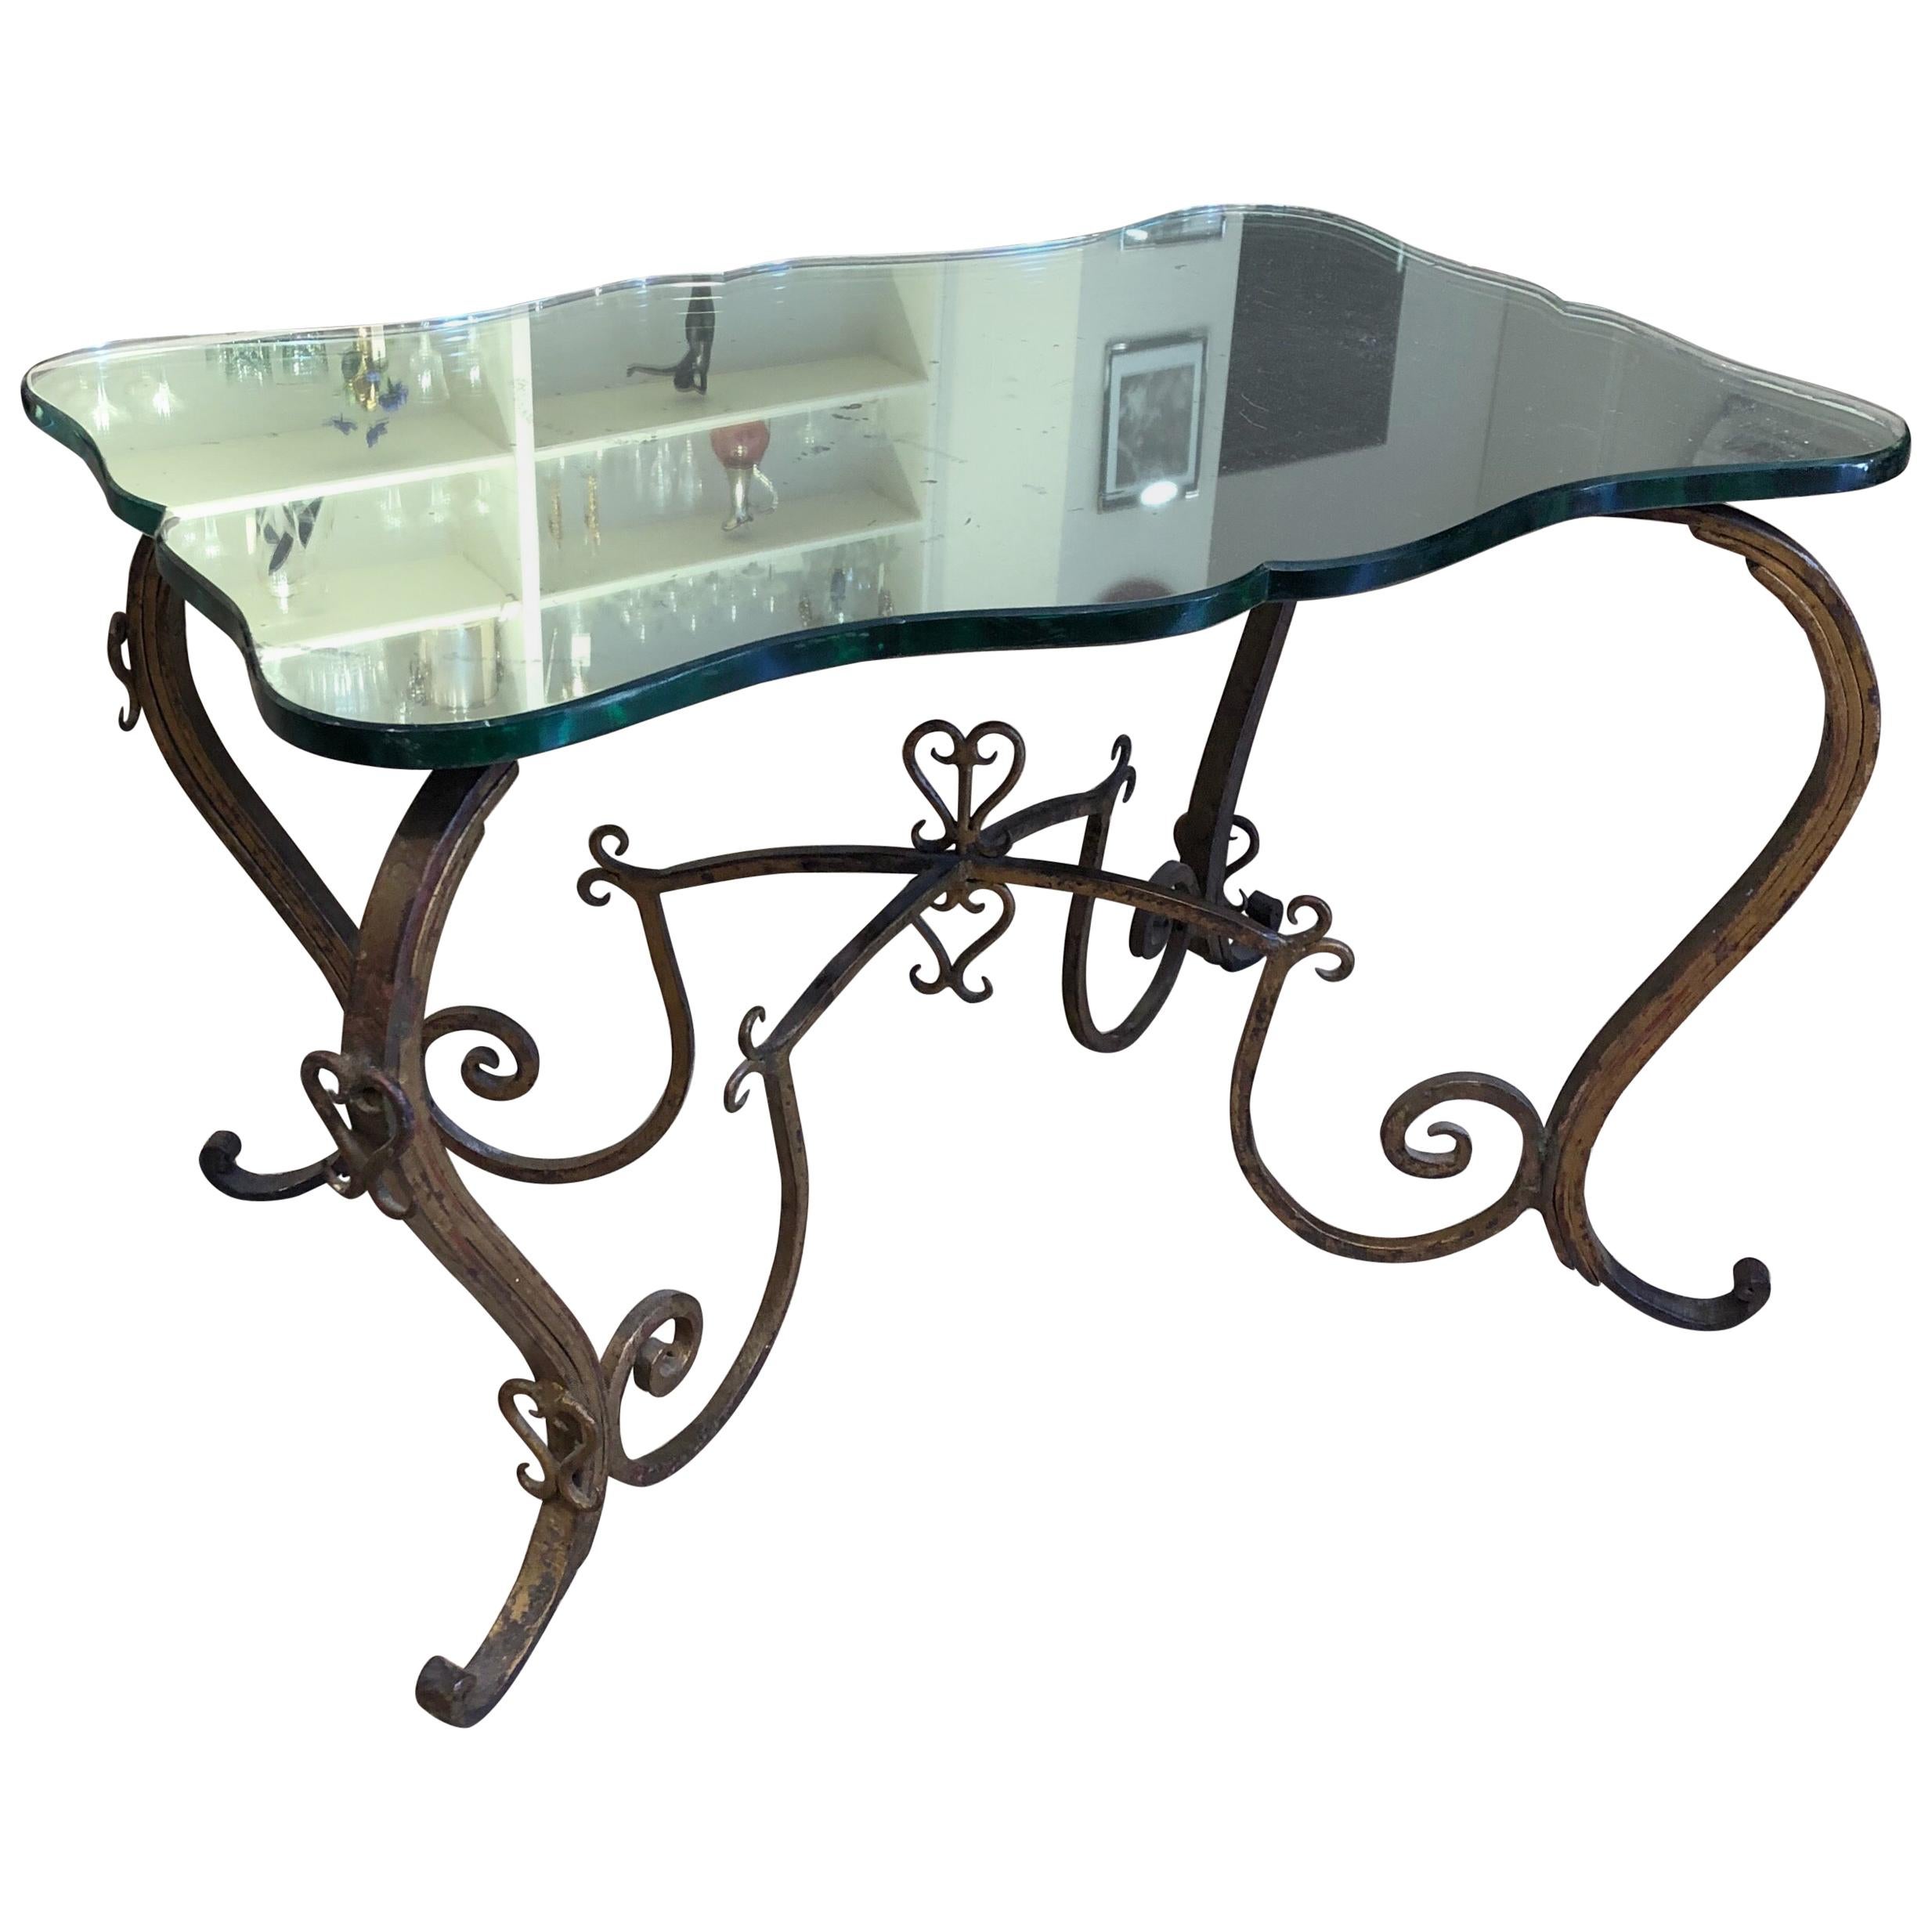 Rene Drouet Hand Forged Guilded Metal Table with Original Mirrored Glass Top For Sale